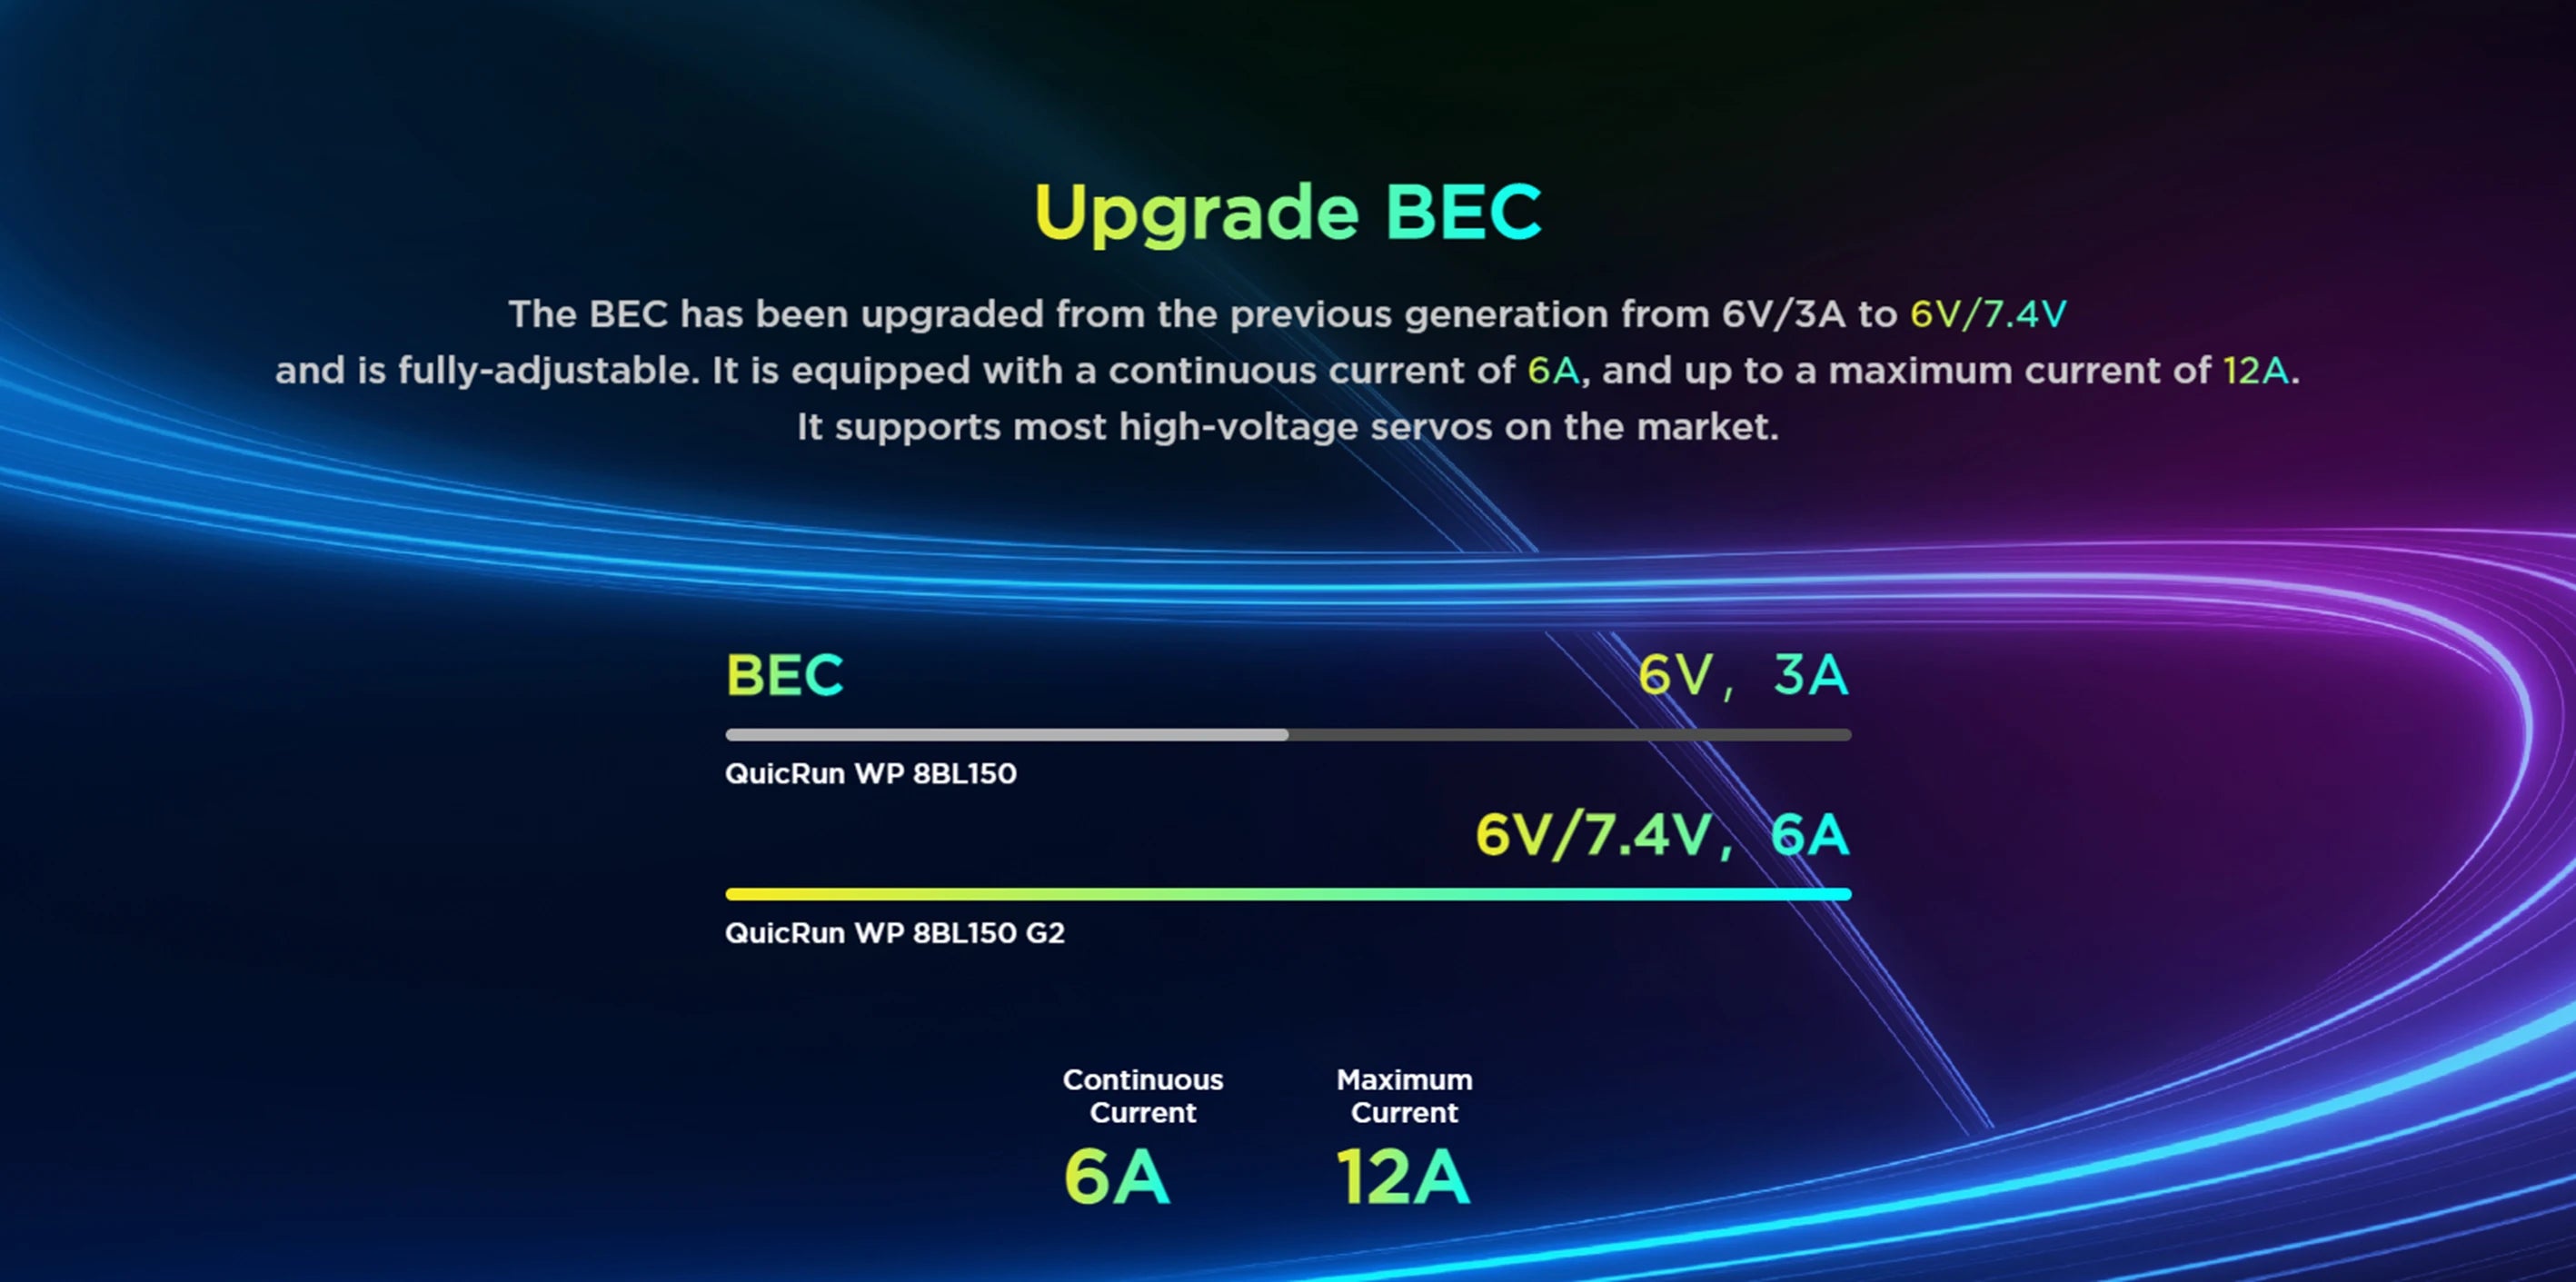 BEC has been upgraded from the previous generation from 6V/3A to 6V/7.